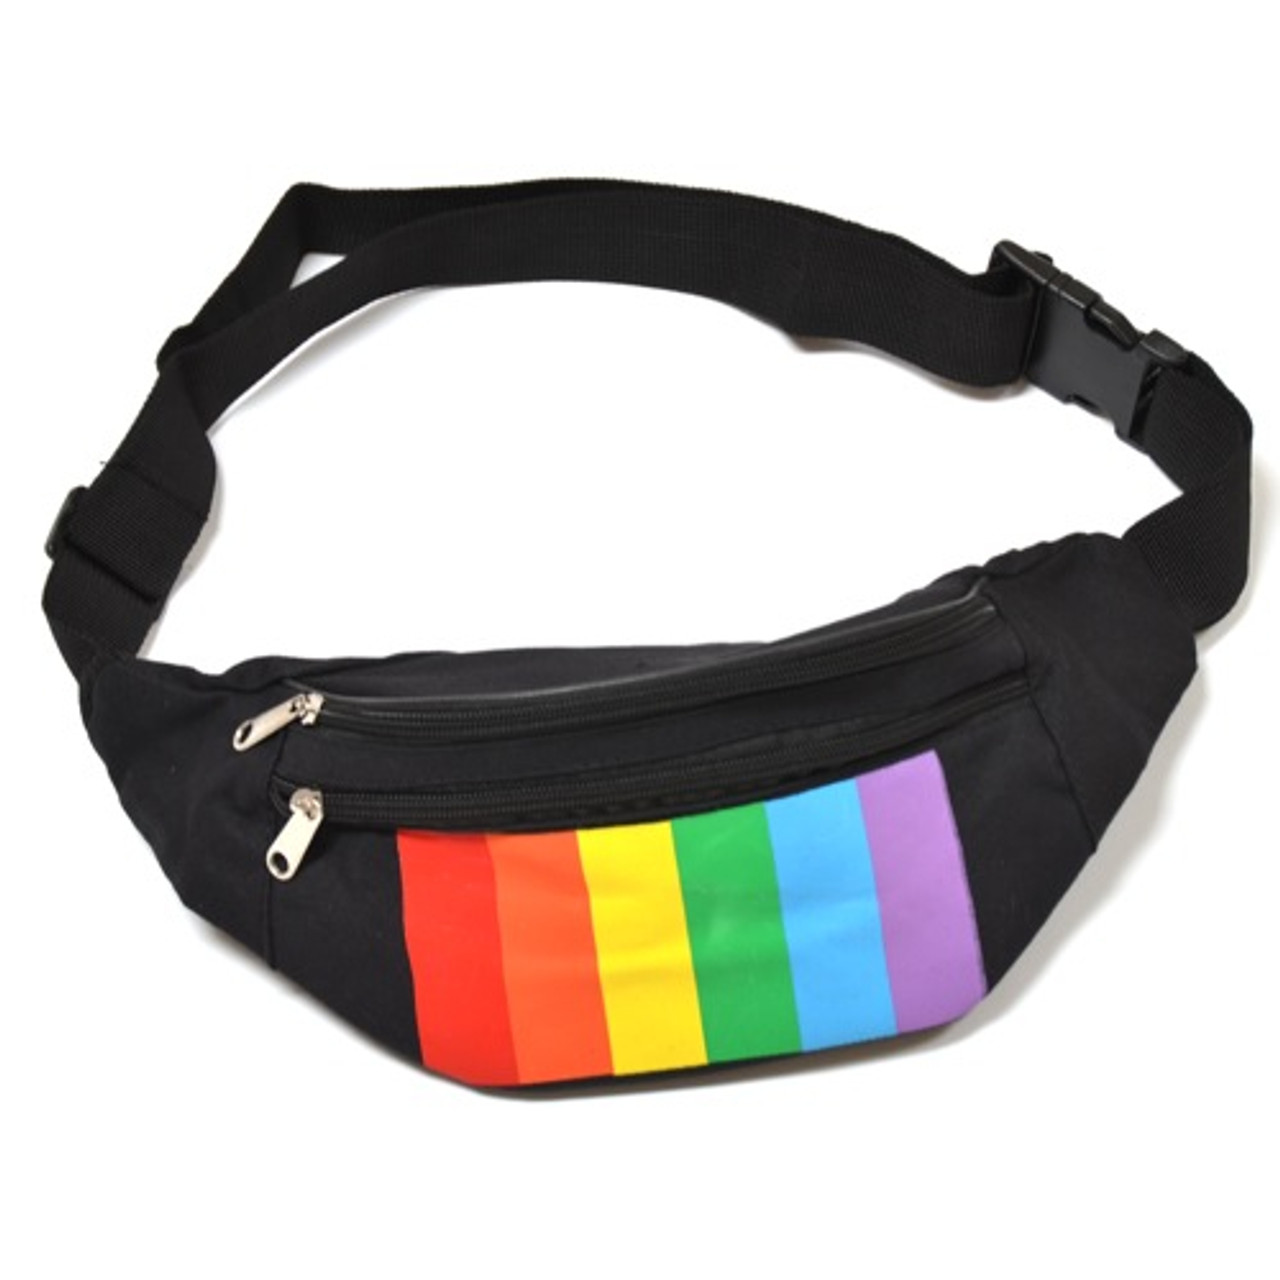 Black Fanny Pack (Rainbow Stripes) - Gay Pride - LGBT Lesbian Pride Gifts and Accessories gay pride clothing,
gay fashion,
pride accessories,
lesbian bag,
lesbian purse,
pride merch,
gay bag, gay purse, rainbow hip pouch